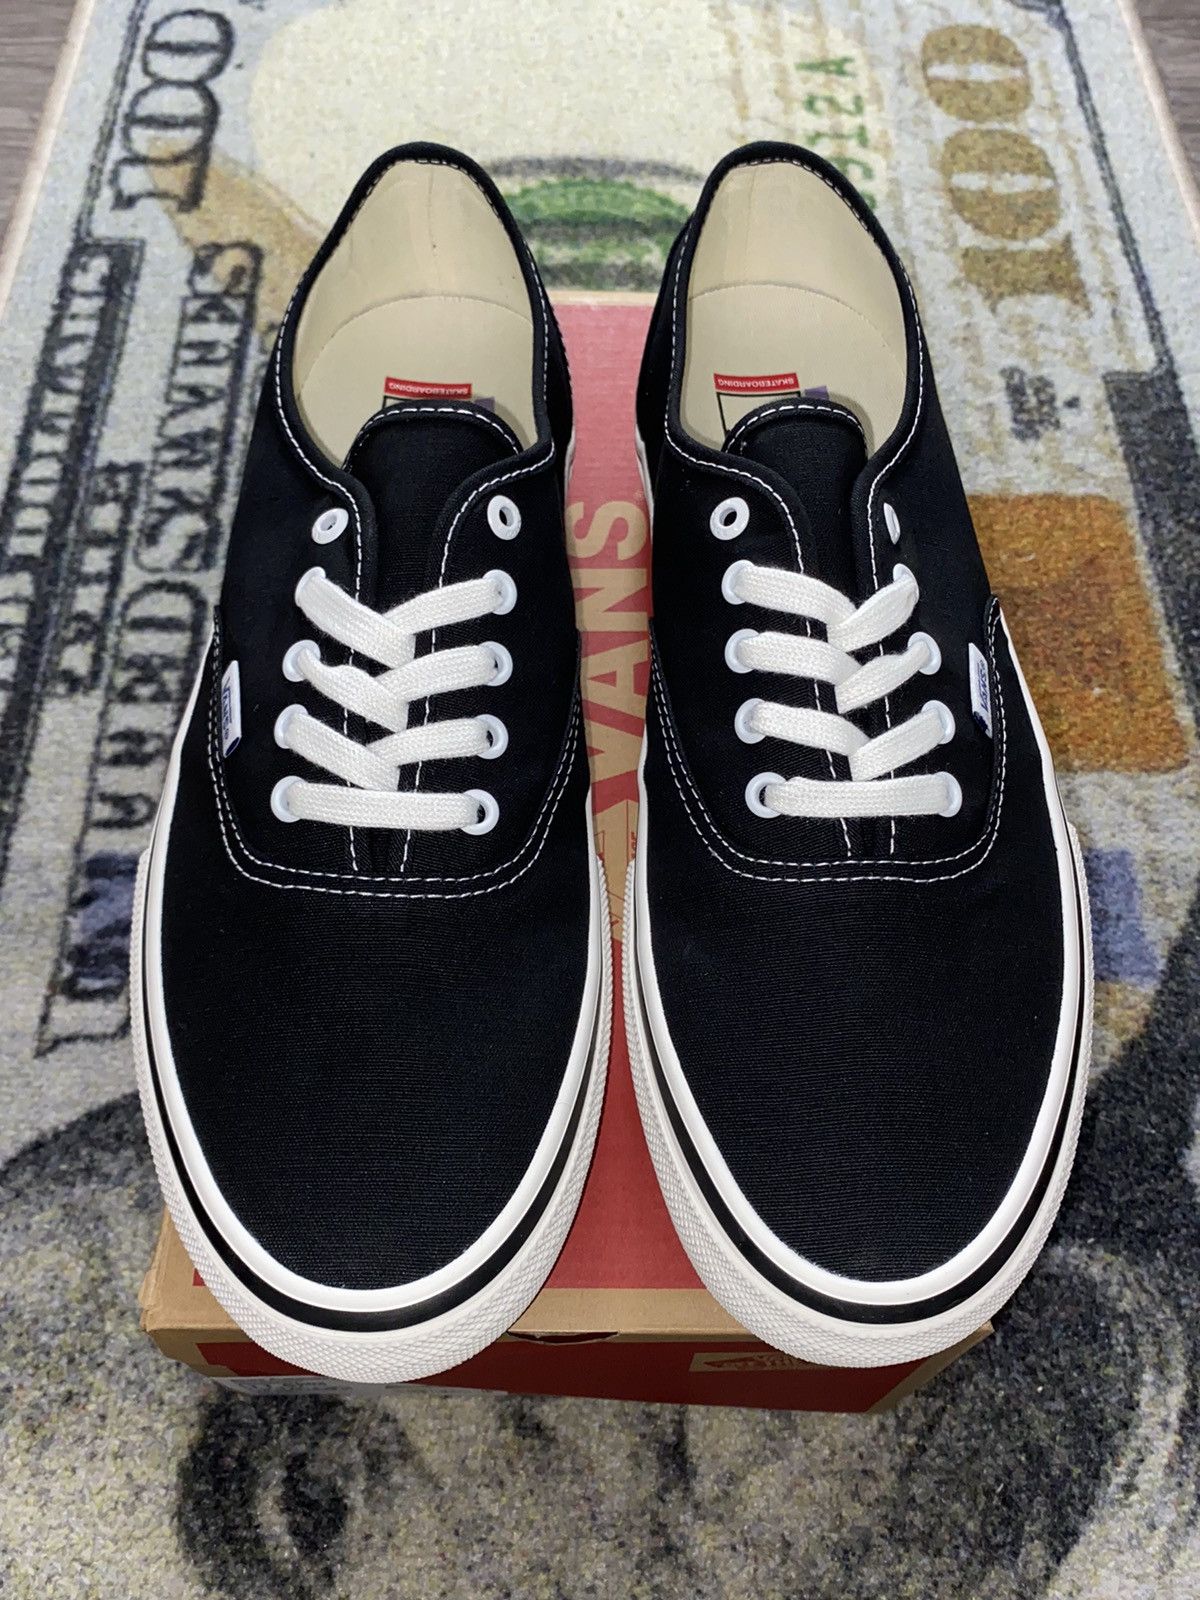 Palace Palace Vans Skate Authentic Classic White | Grailed